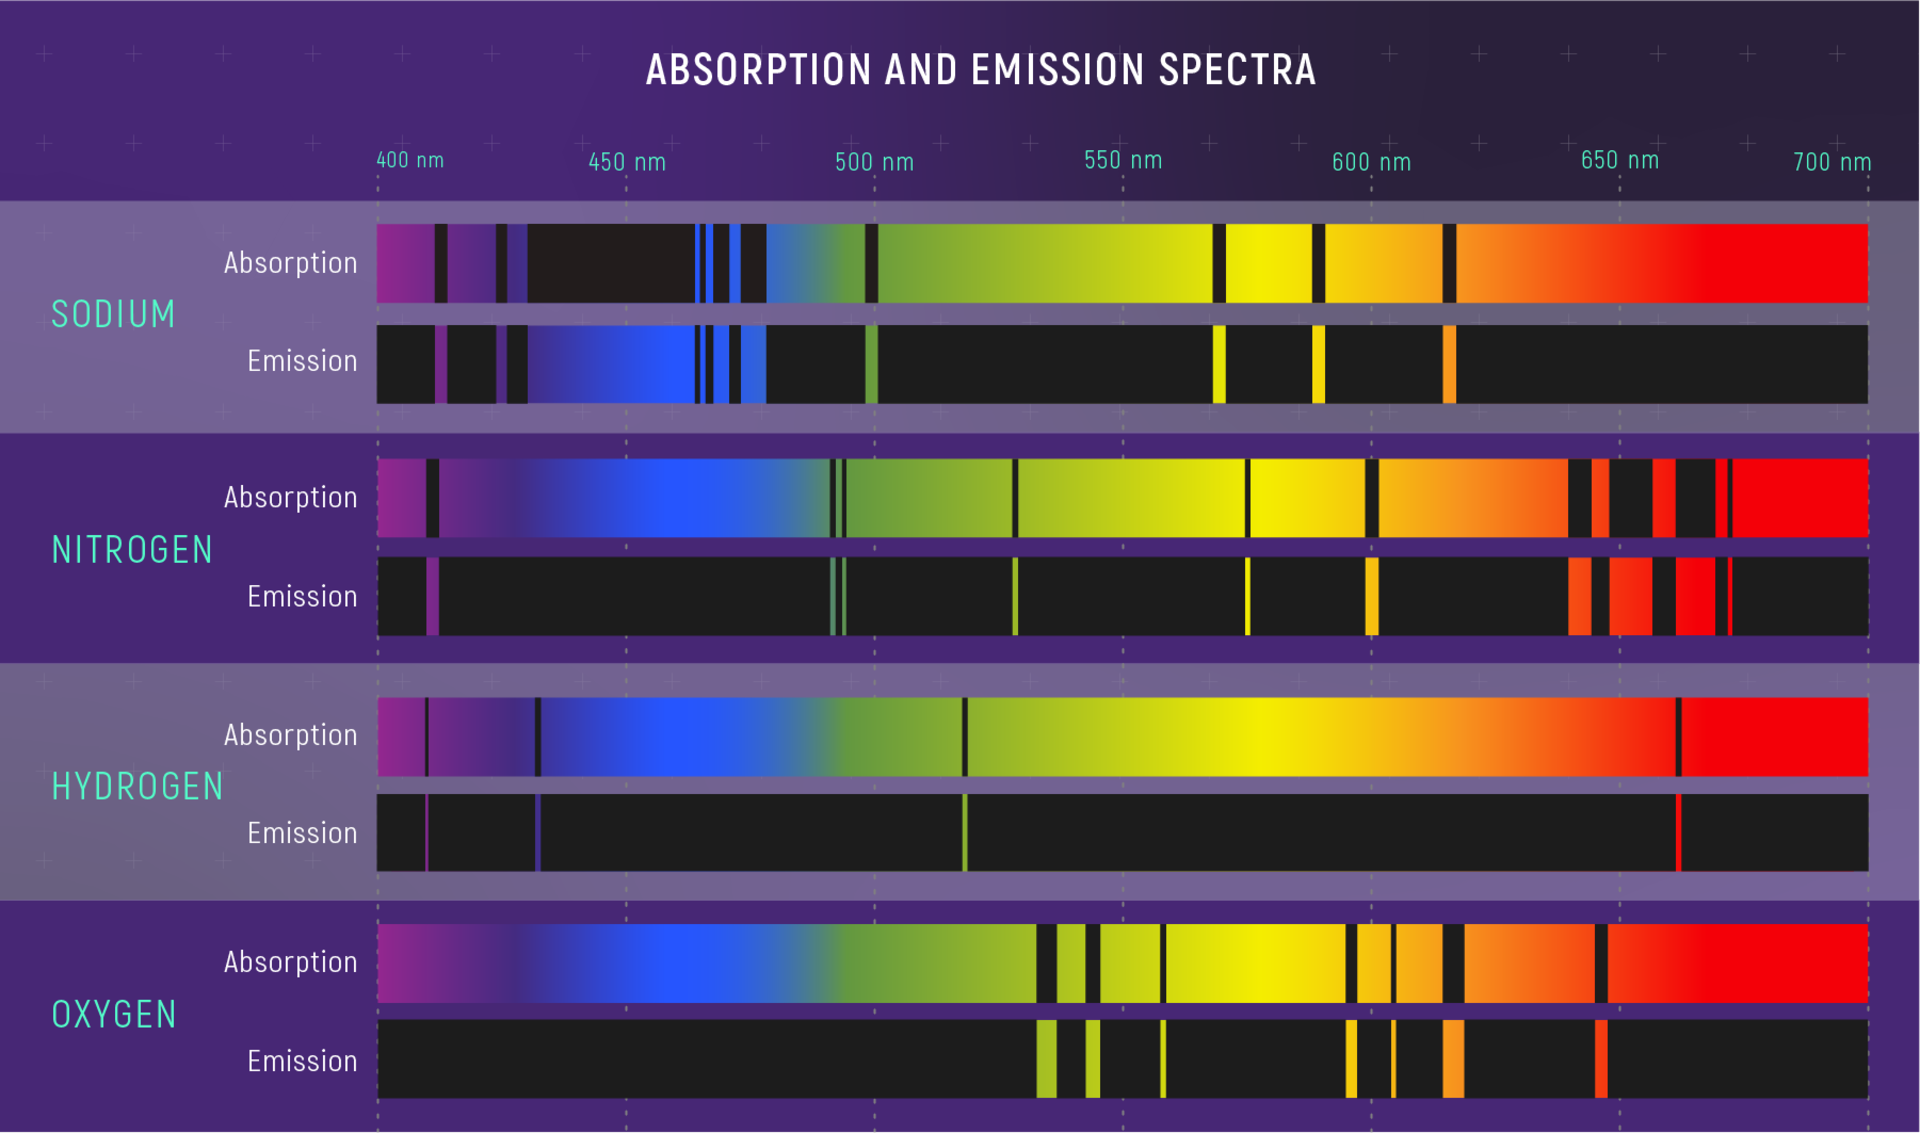 Absorption and emission spectra of various elements